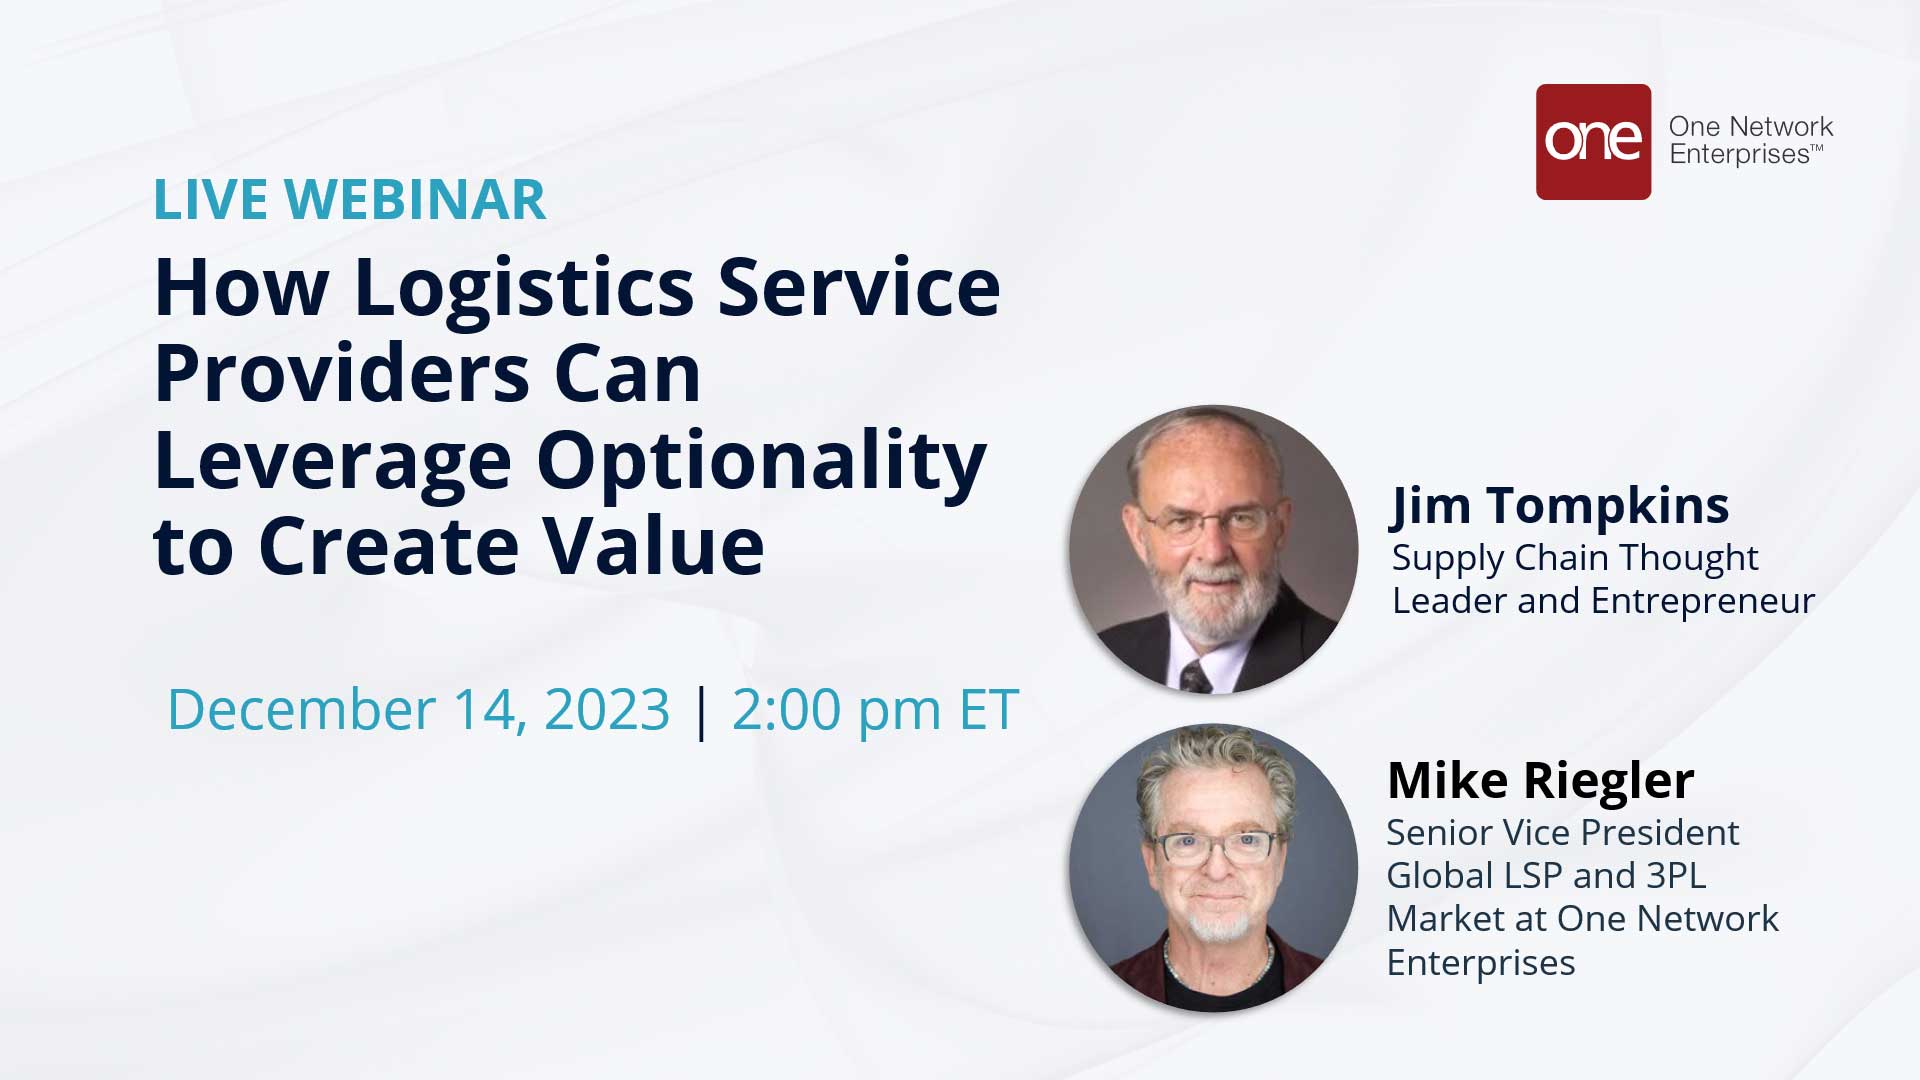 How Logistics Service Providers Can Leverage Optionality to Create Deep and Enduring Value for Customers